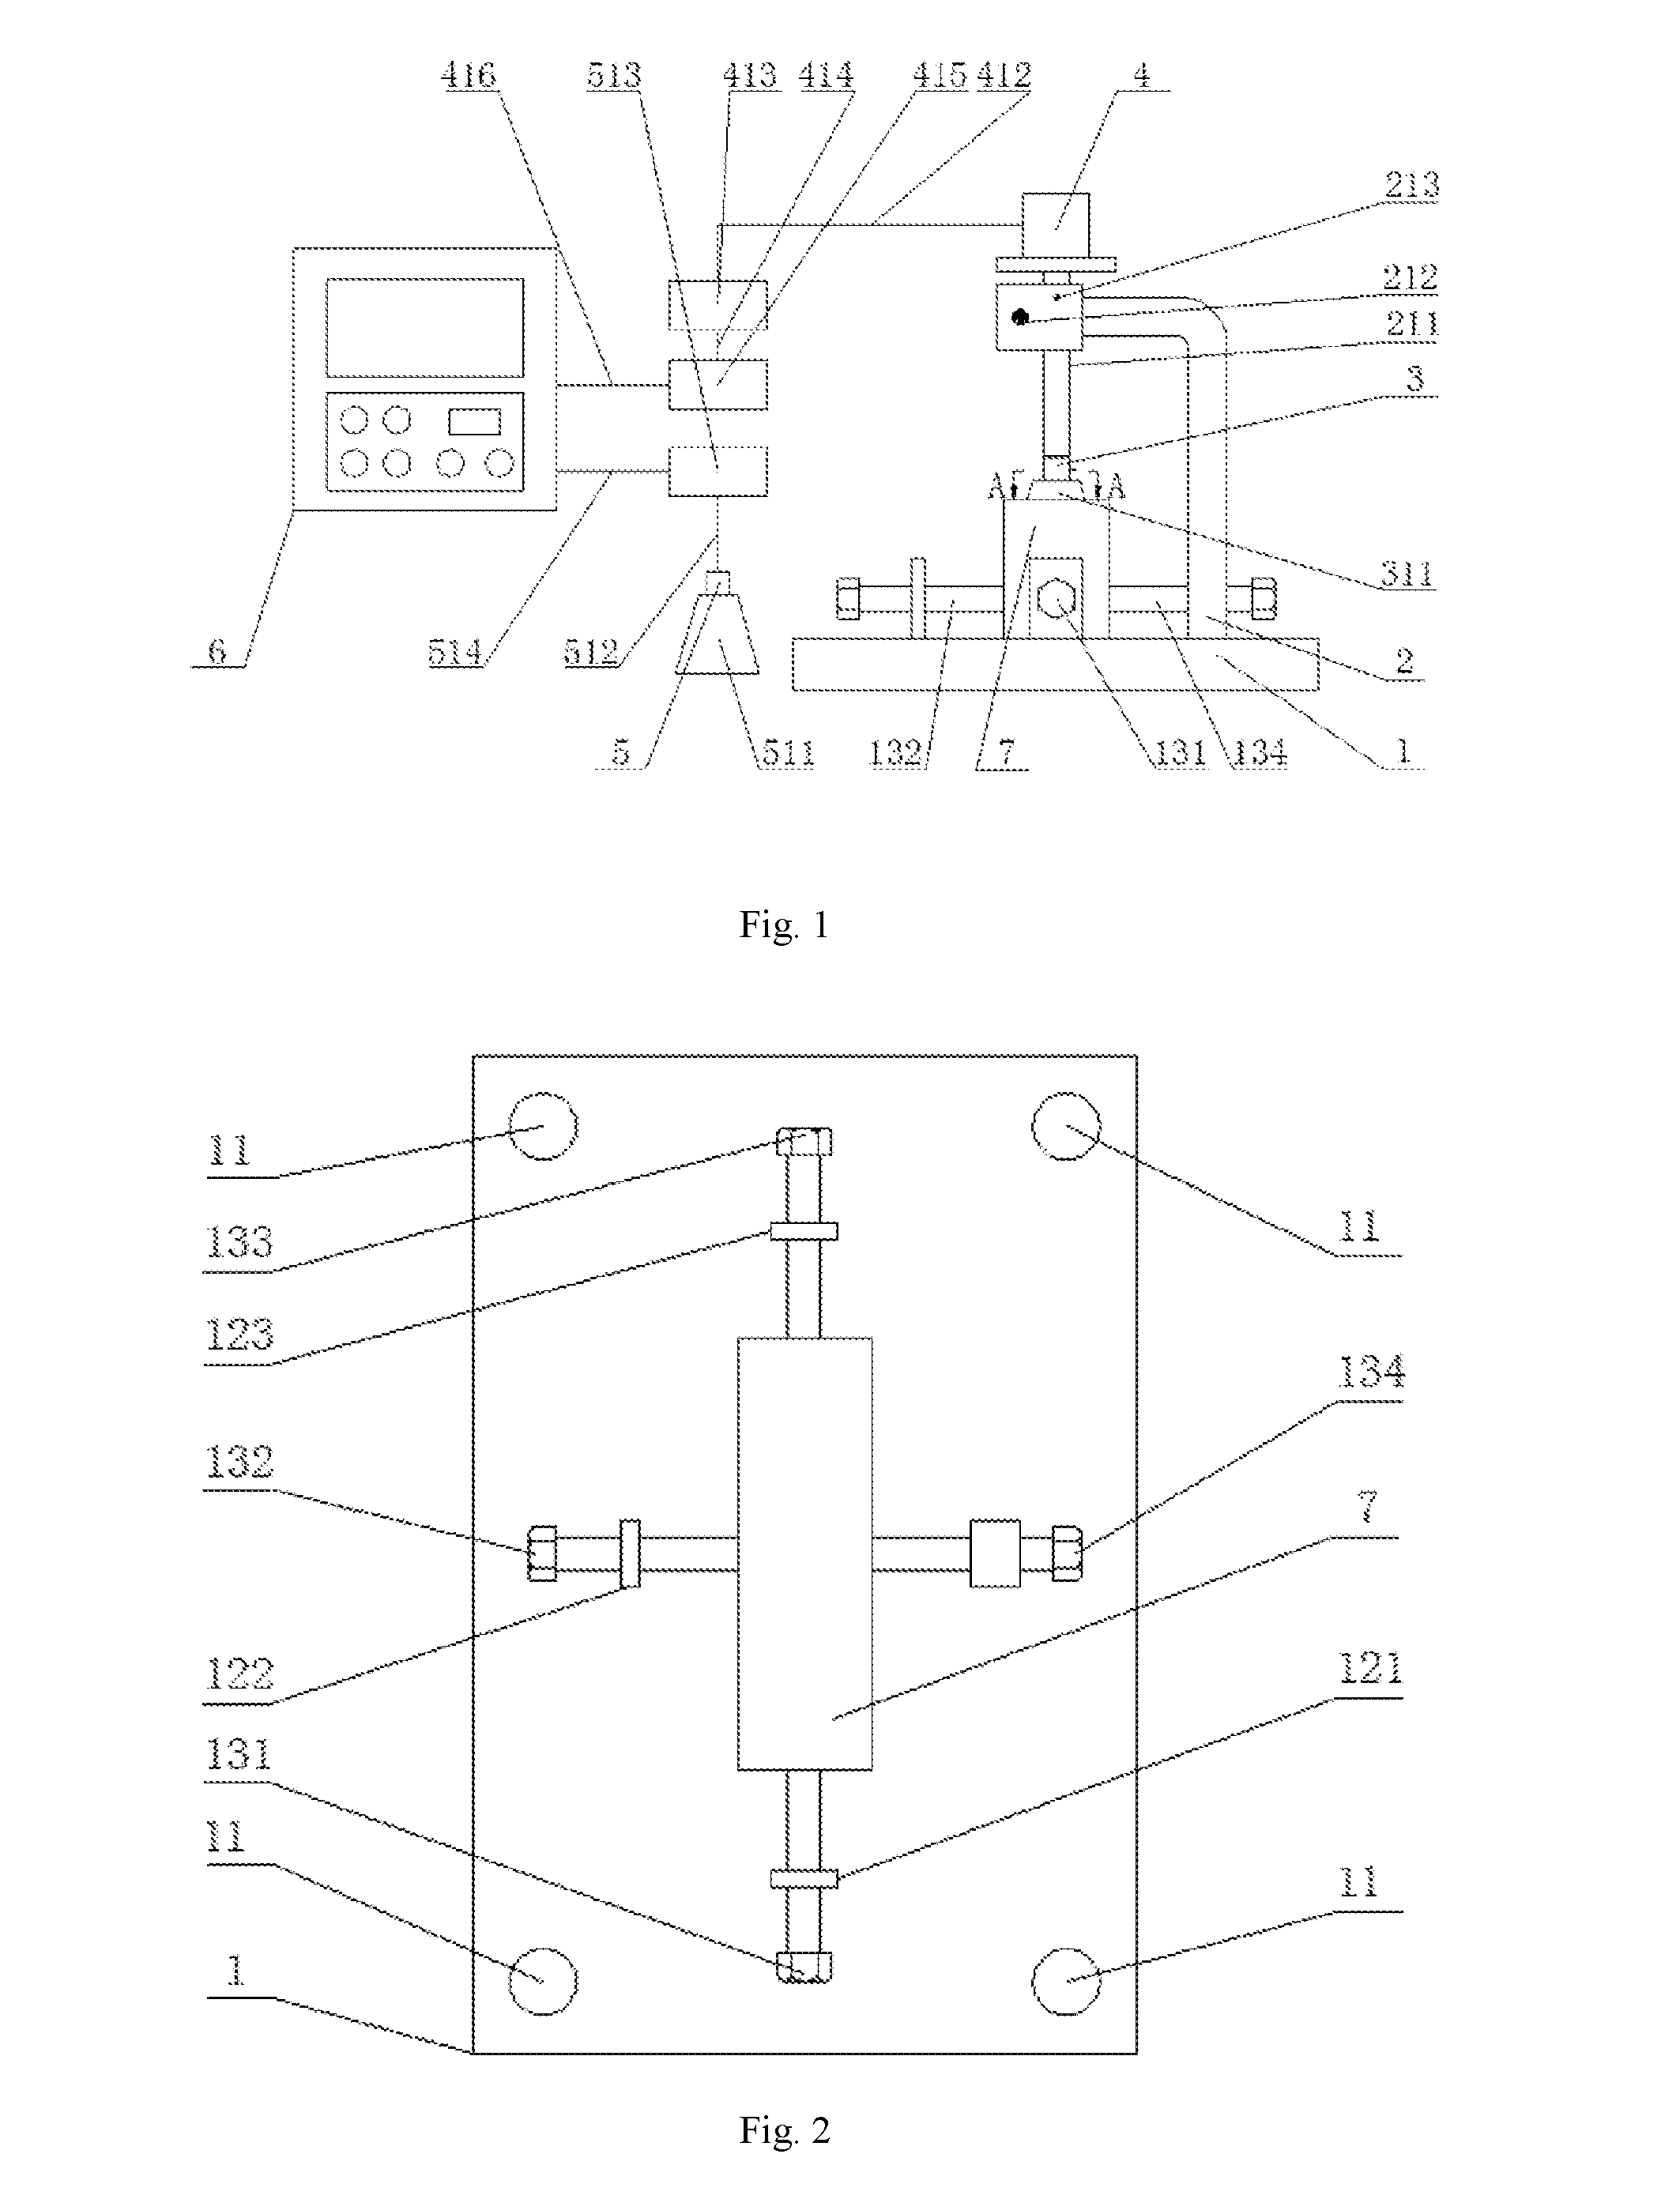 Automatic observation apparatus for detecting mineral samples